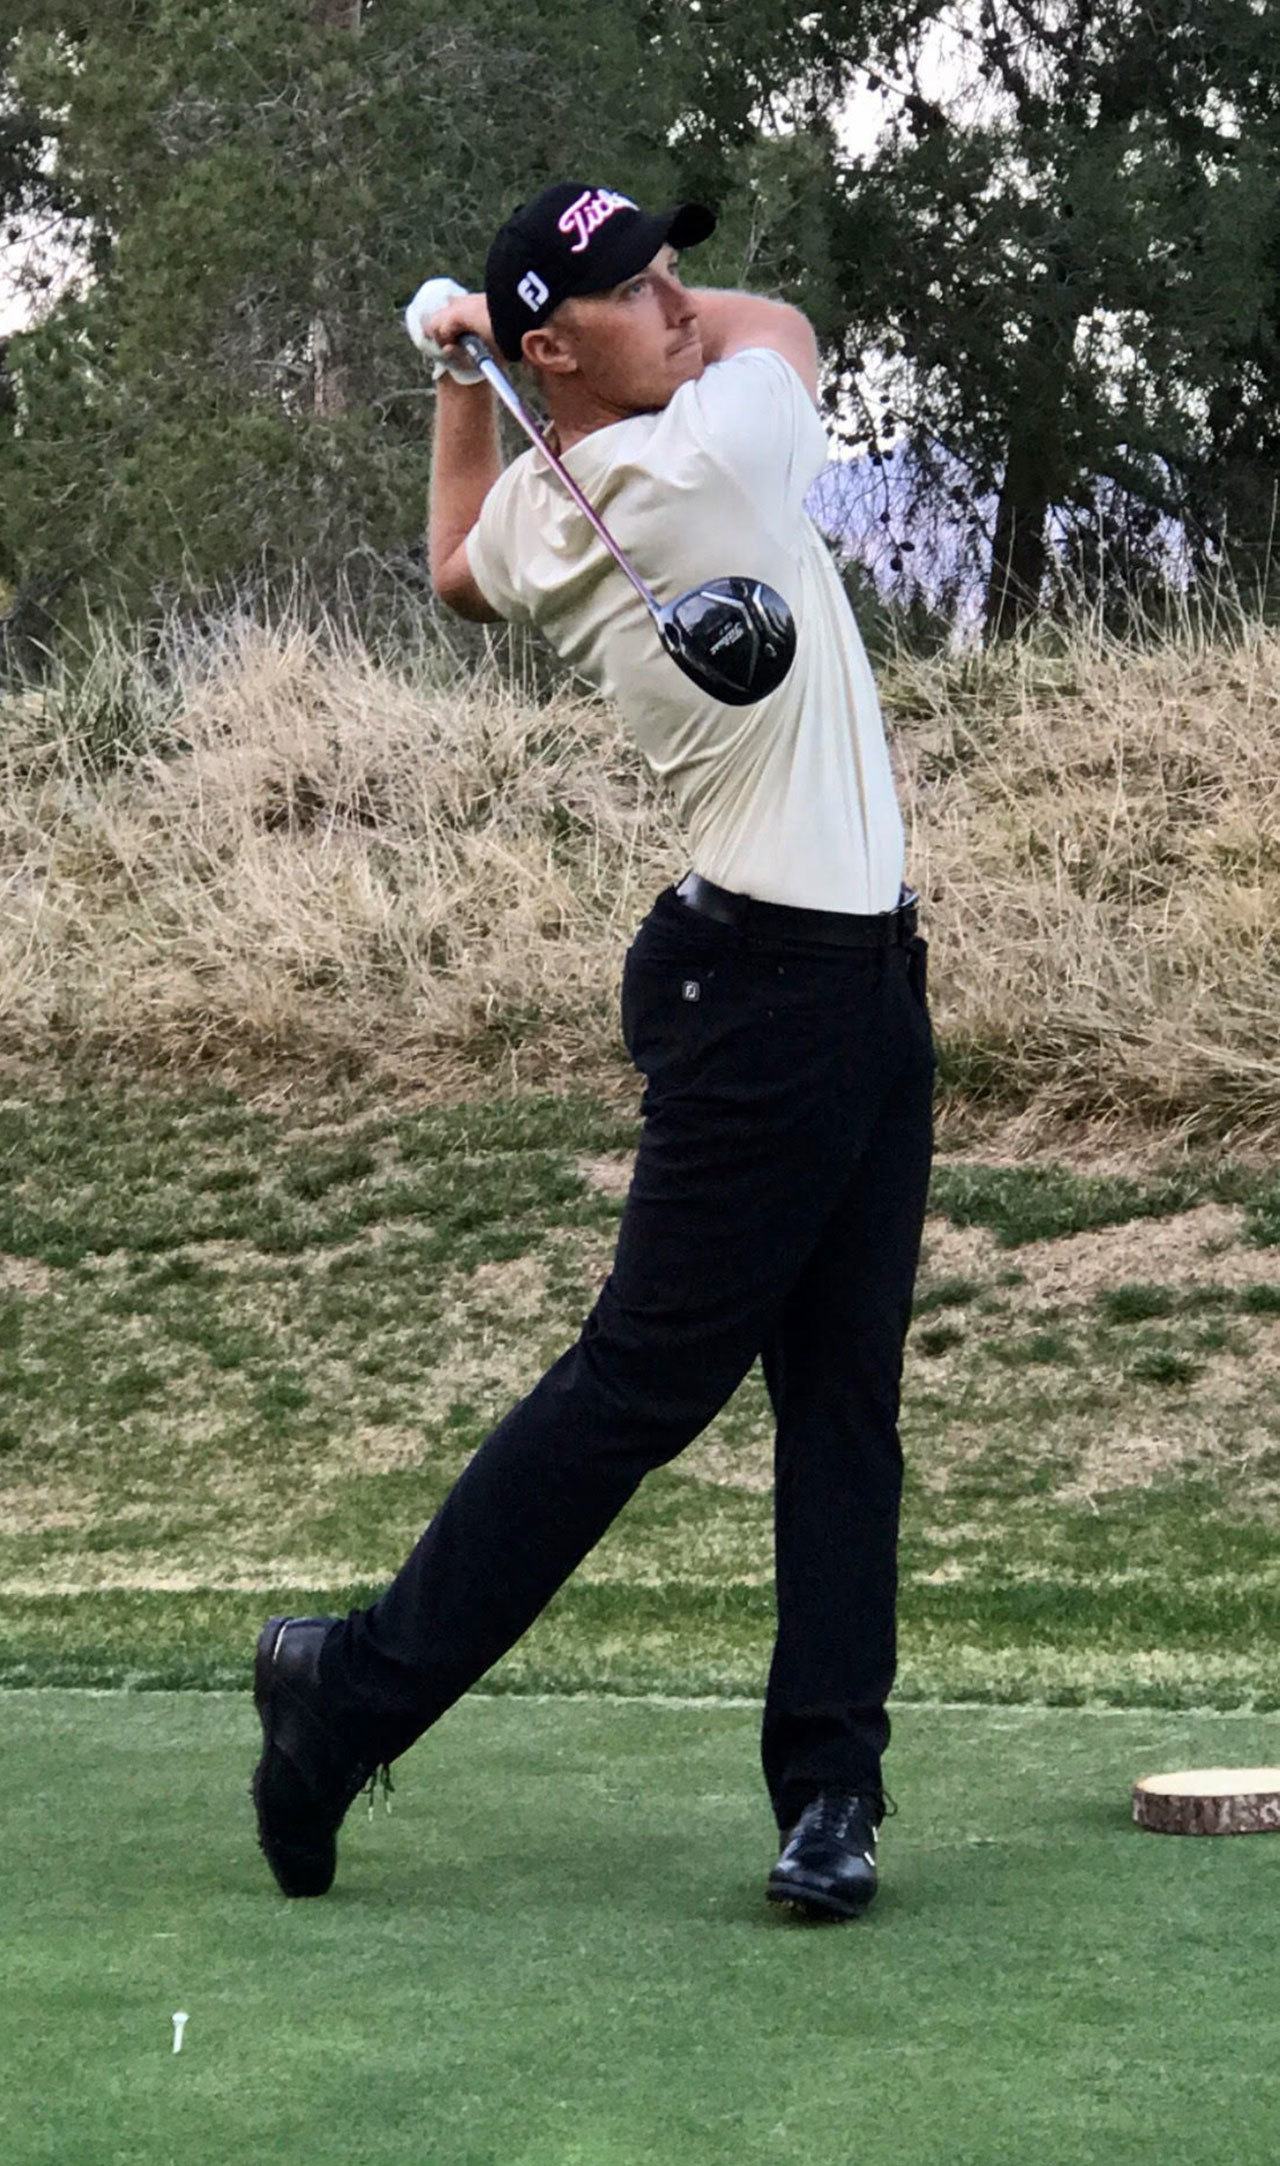 Eric McCardle tees off at the Shadow Creek Golf Course in Las Vegas earlier this month. (Photo by Jennifer Hahn)